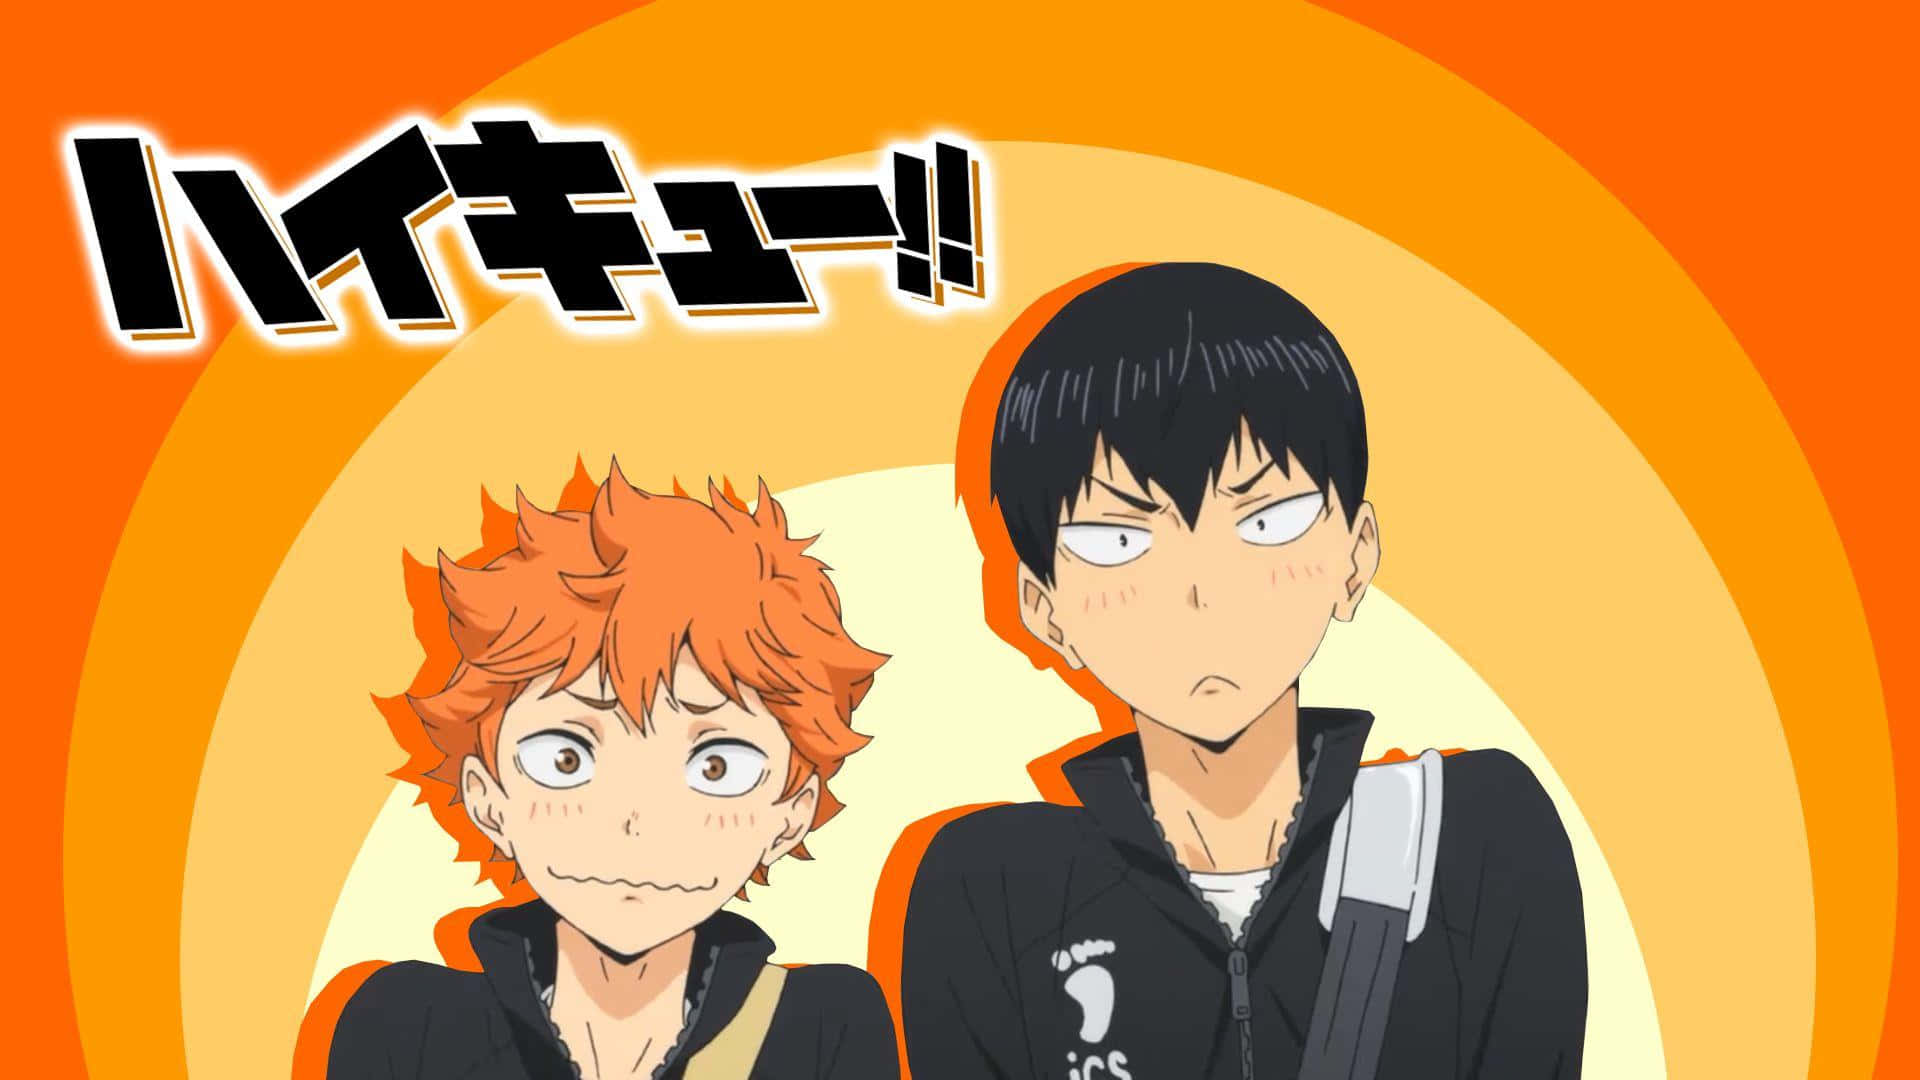 Wallpaper Featuring Characters from the Haikyuu Anime Series Wallpaper